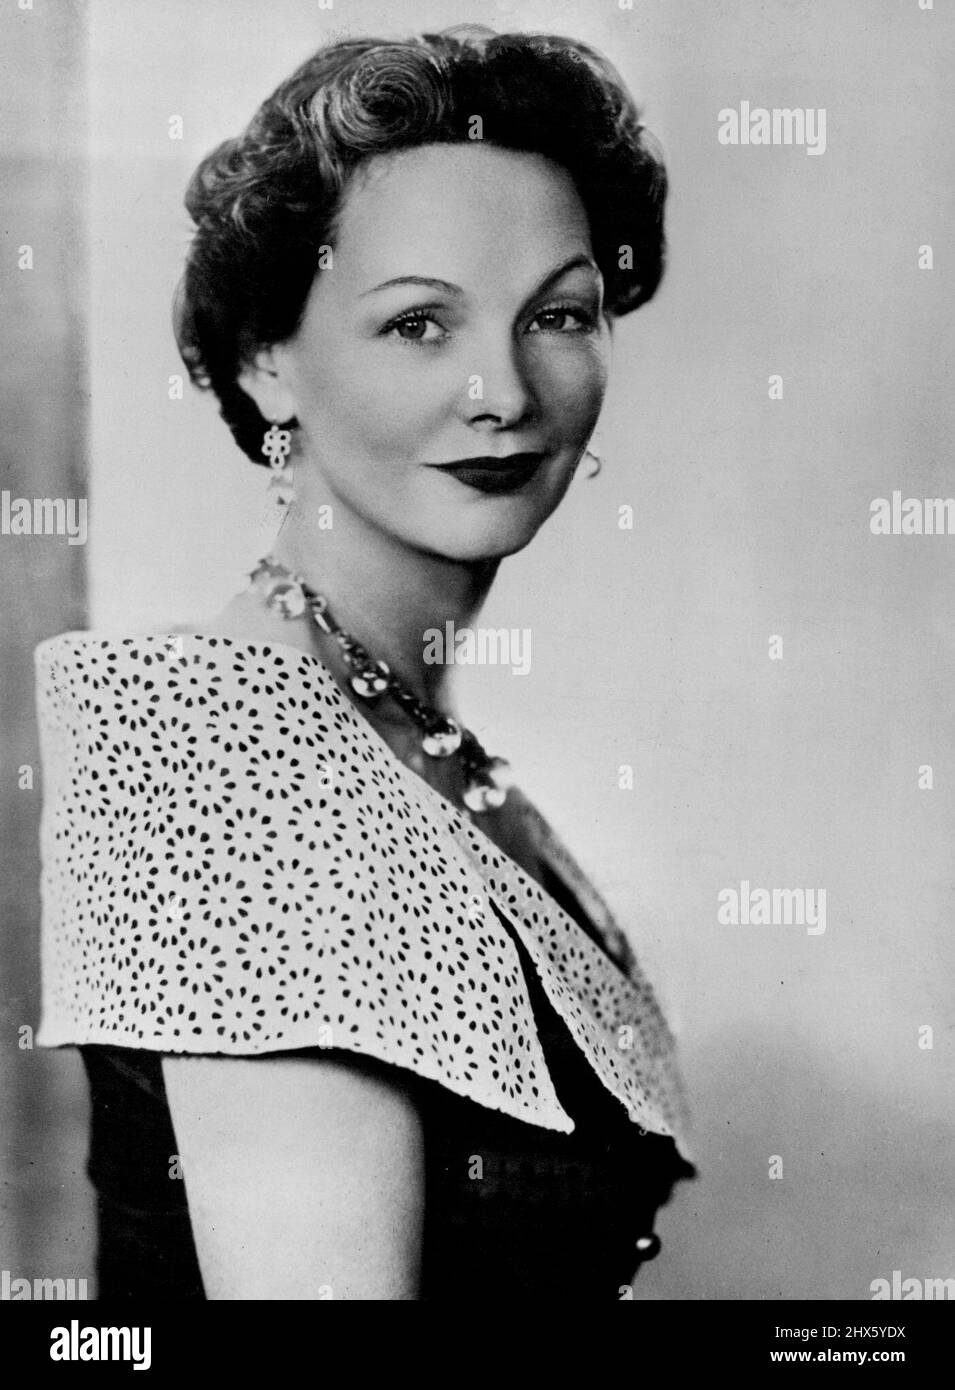 Elizabeth Allan, British television star and film actress. October 13, 1953. (Photo by Dorothy Wilding, Camera Press).;Elizabeth Allan, British television star and film actress. Stock Photo